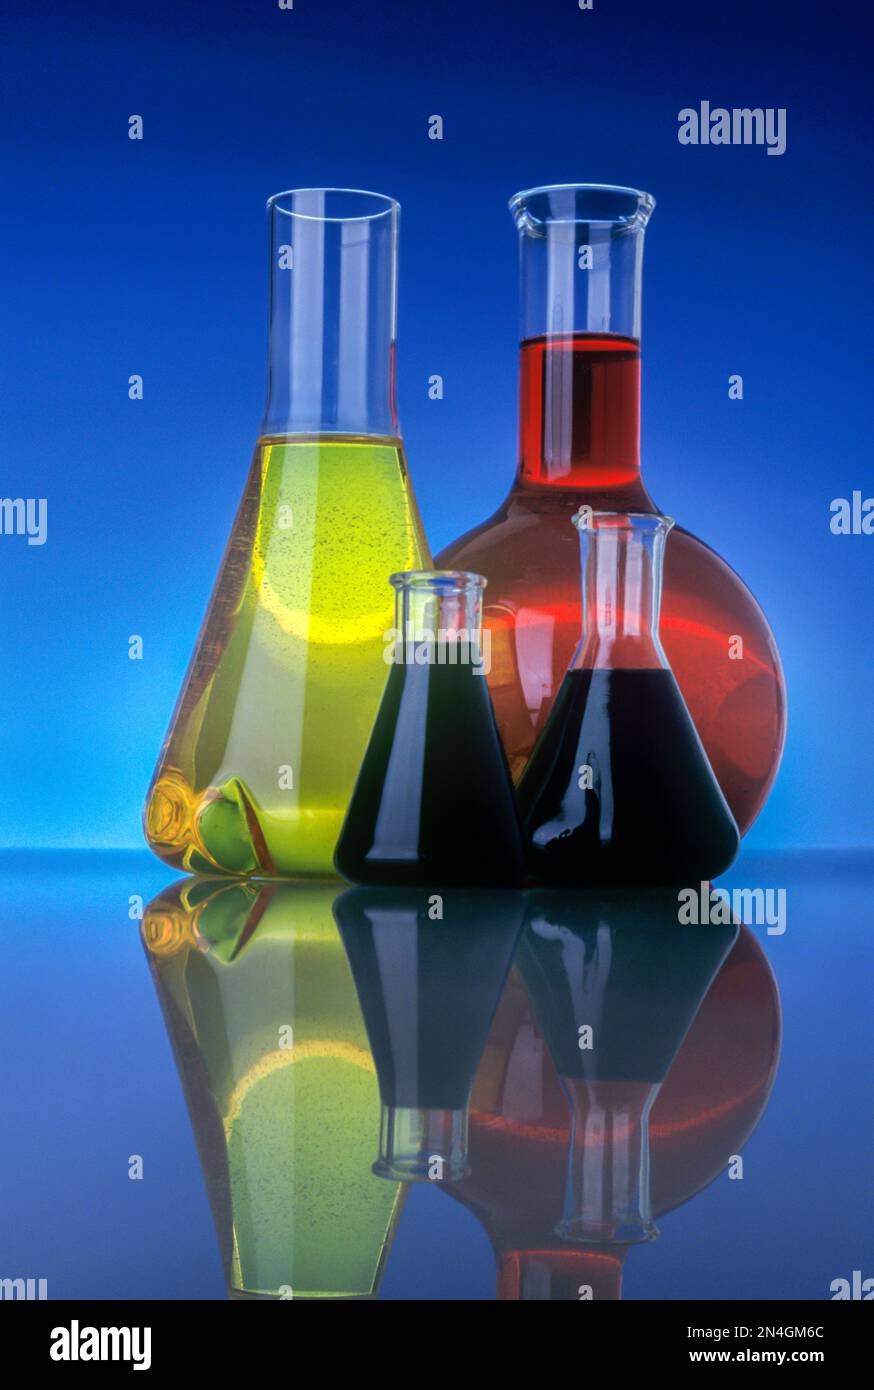 LABORATORY CHEMICAL FLASKS WITH COLORED LIQUIDS Stock Photo